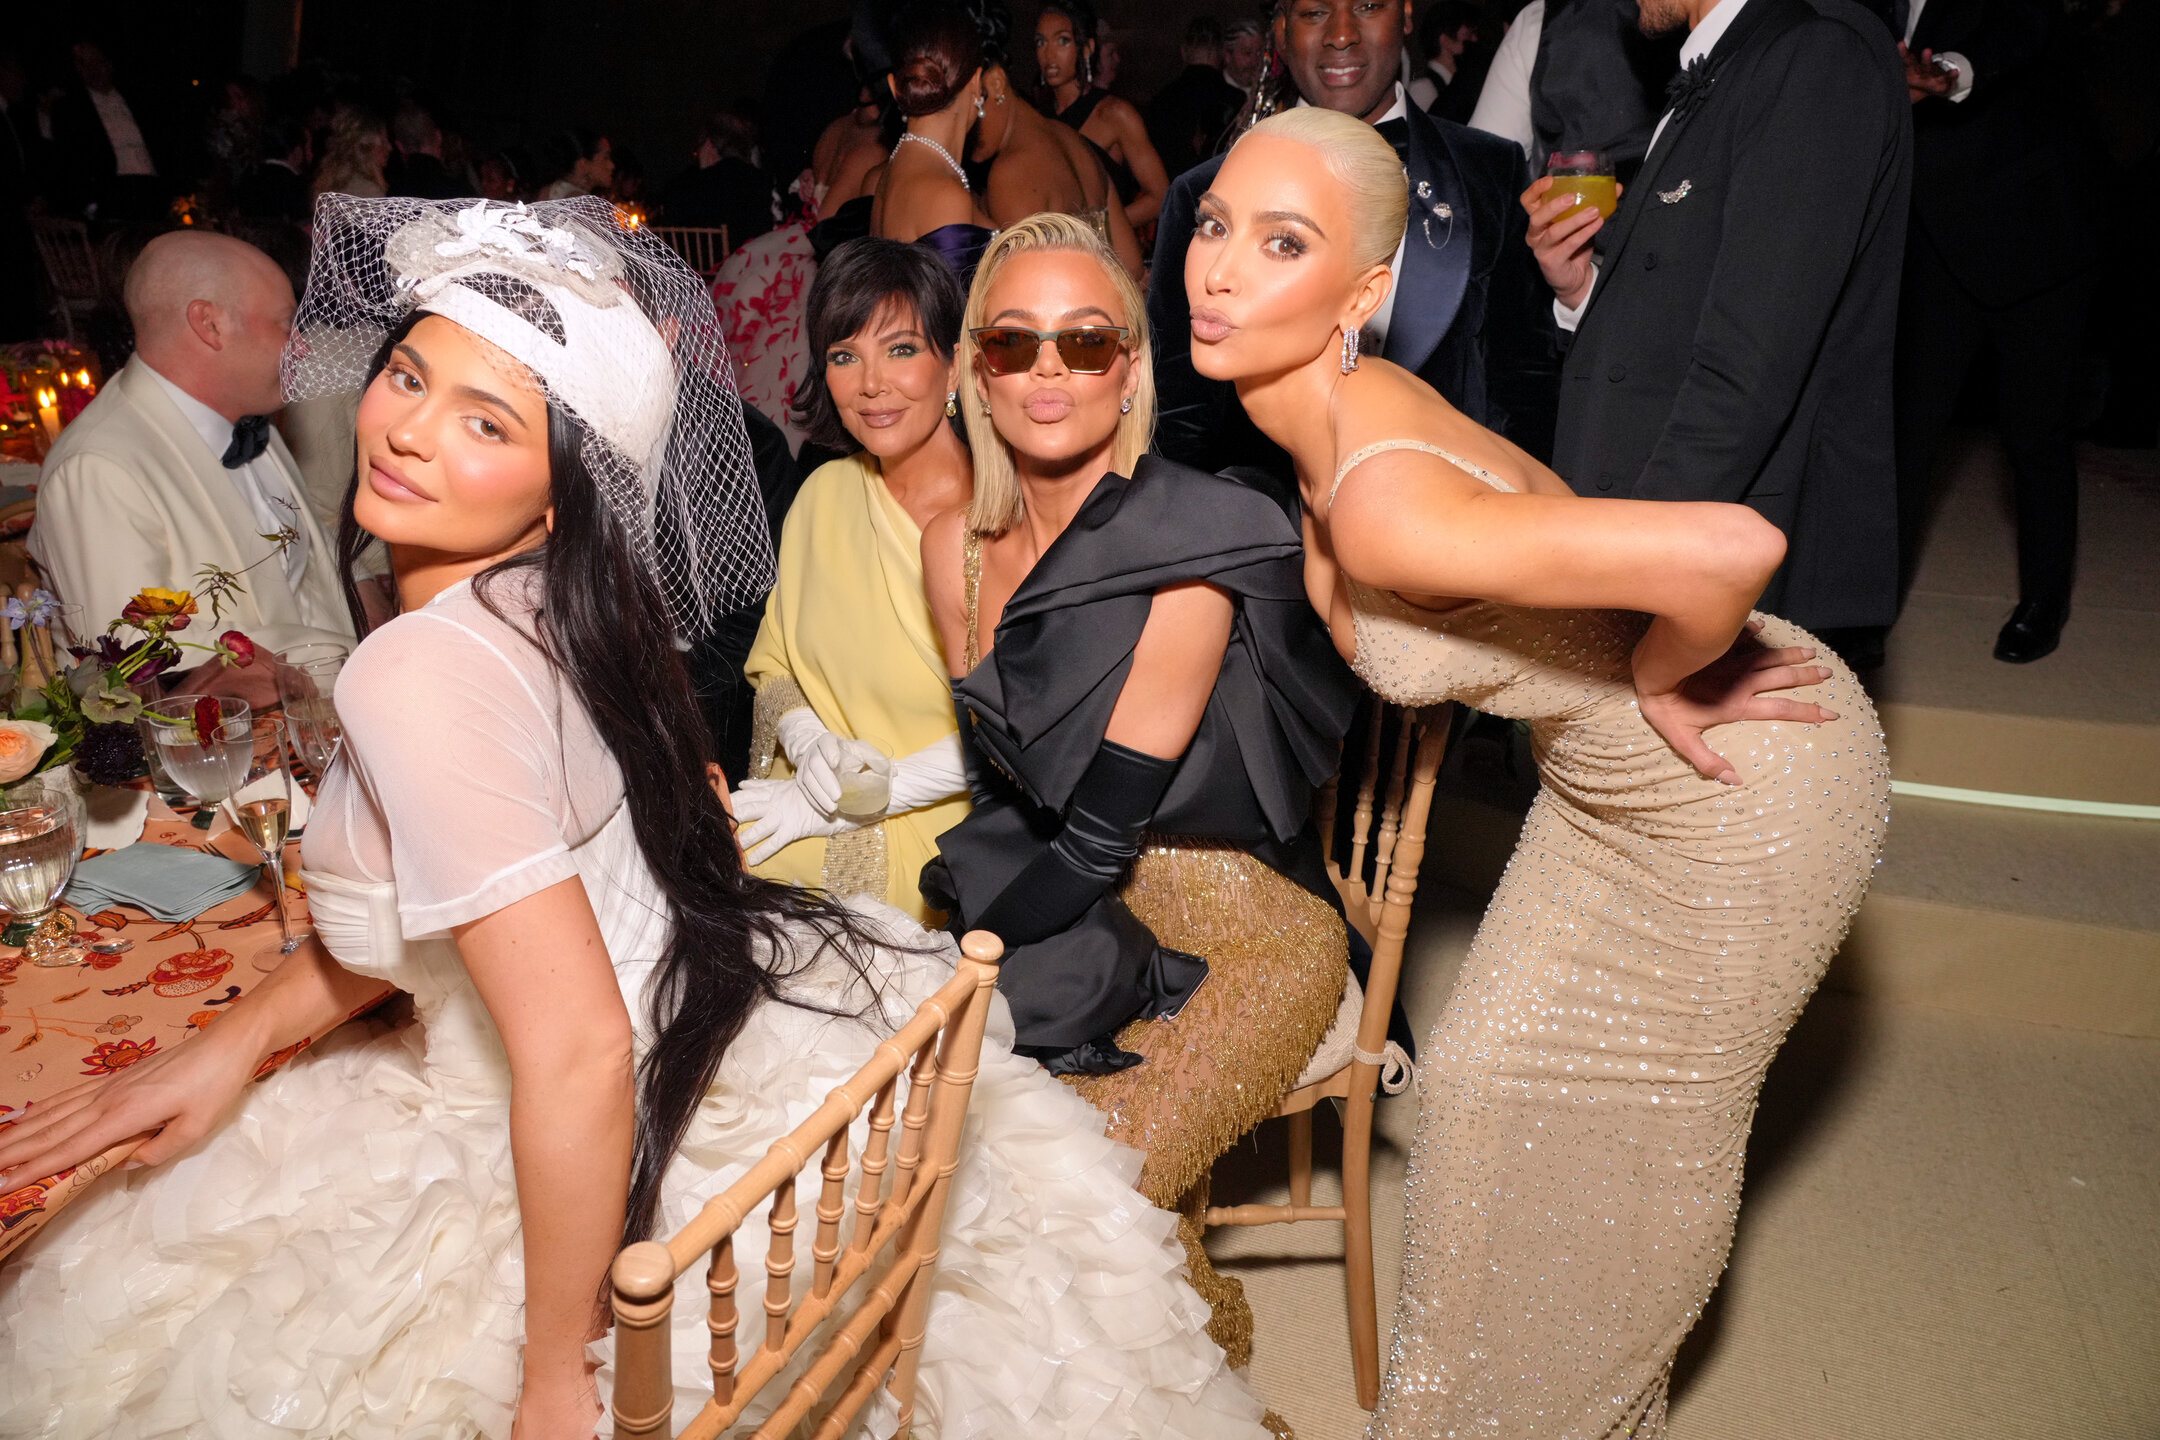 Khloé Kardashian did not want to attend the Met Gala. Sister Kim convinced her. Here's the family photographed together sitting down at the event.